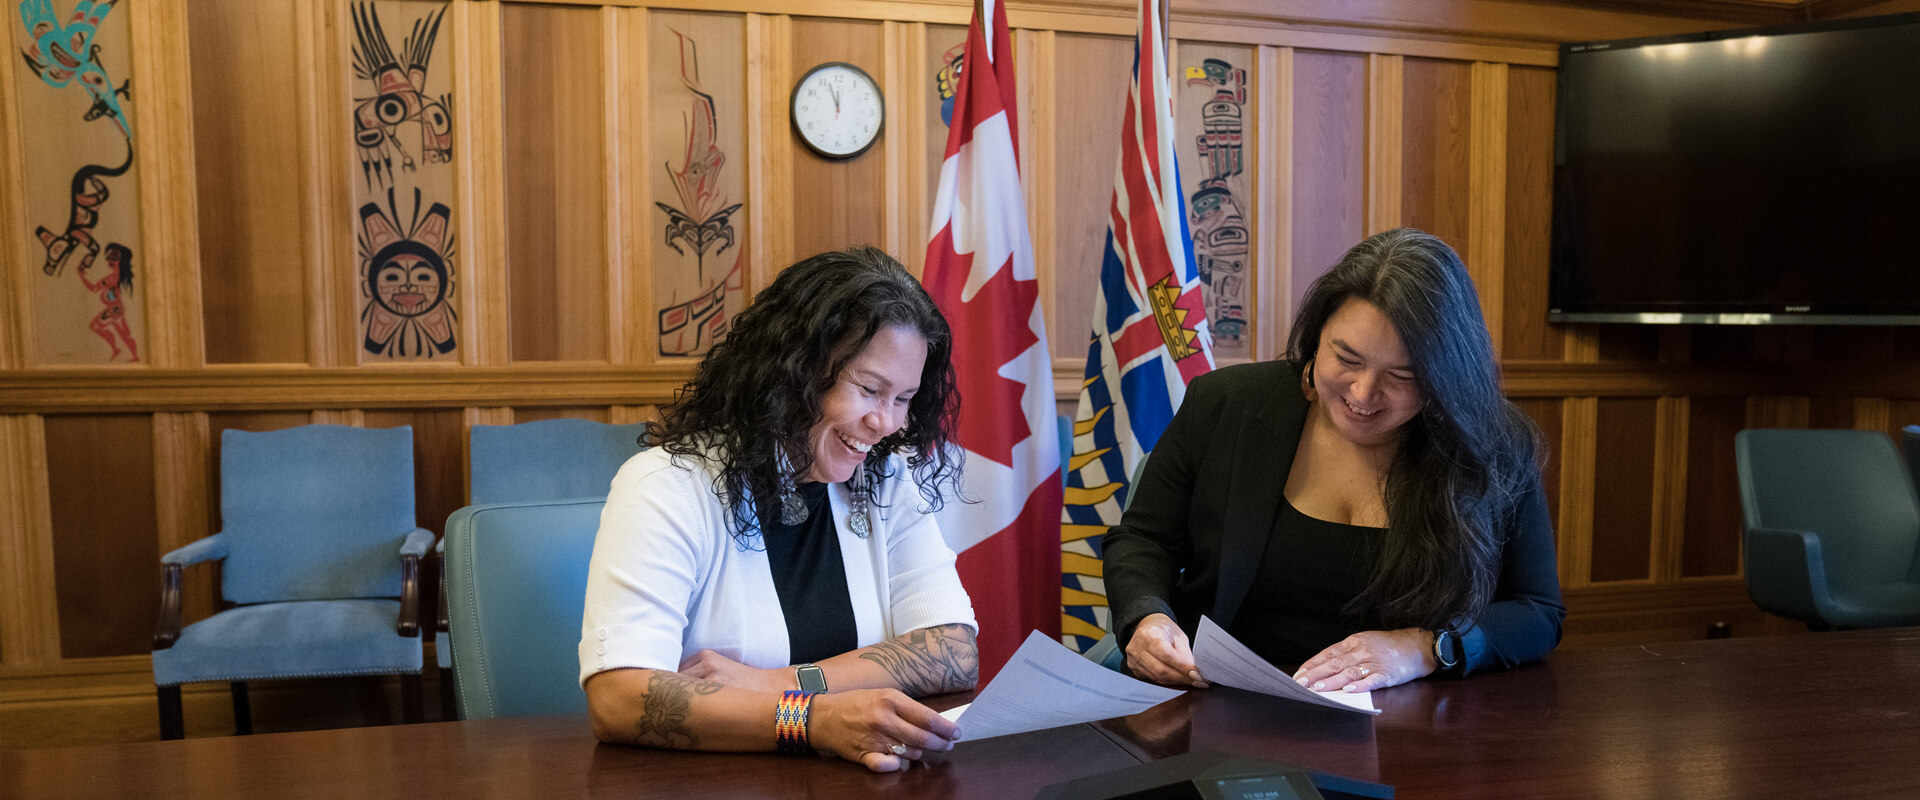 Jessica and Priscilla sitting together at a long table, smiling and laughing while handling papers. They sit in front of the BC and Canada flags, and the wood panelled wall has traditional artwork.